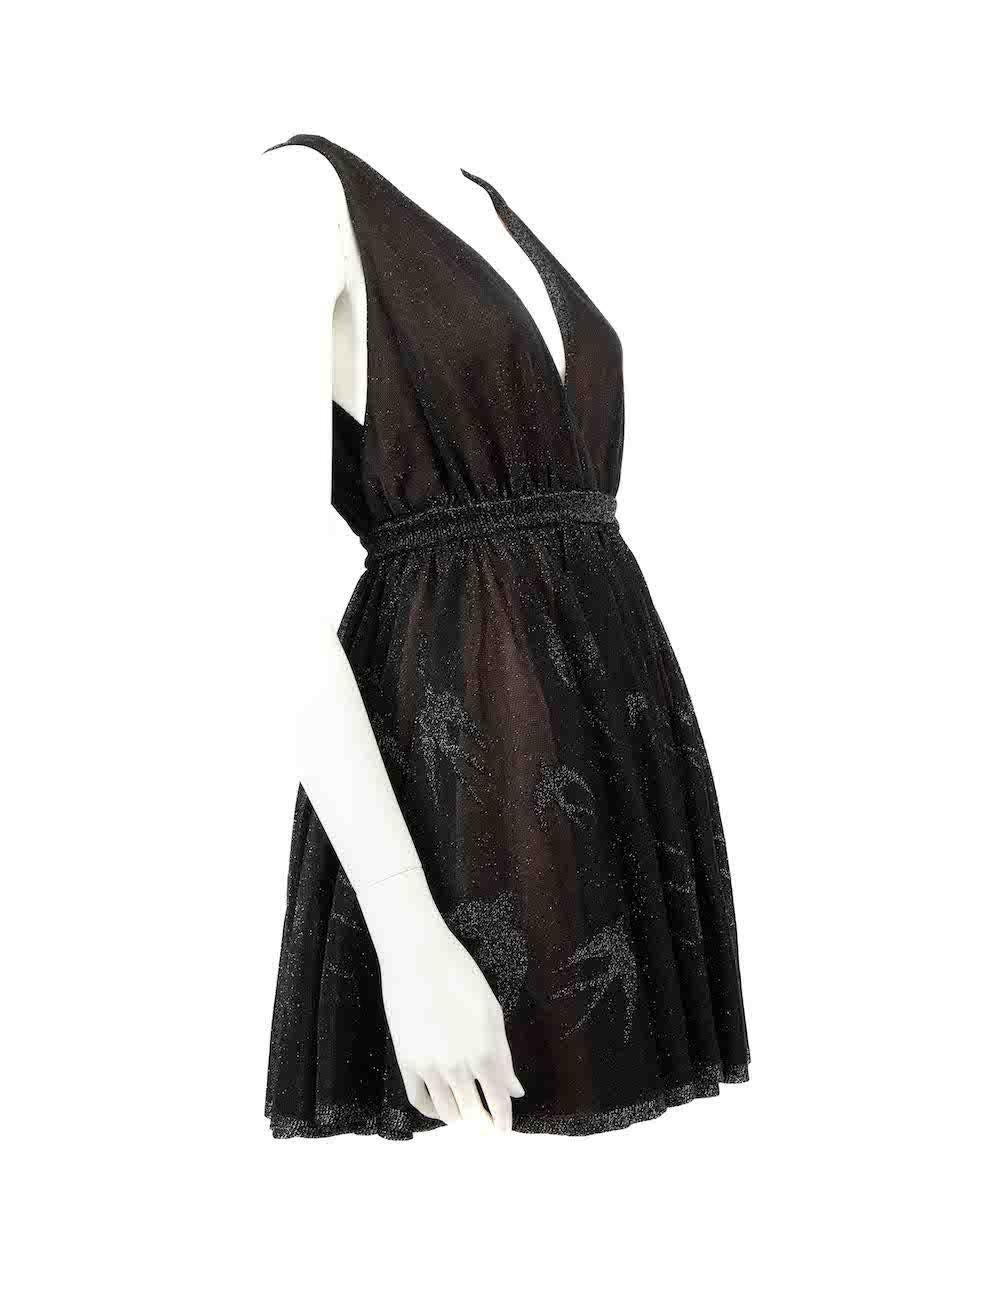 CONDITION is Very good. Hardly any visible wear to dress is evident on this used Alaïa designer resale item.
 
 Details
 Black
 Viscose
 Dress
 Metallic swallow pattern
 Mini
 Sleeveless
 Plunge neck
 Elasticated waist
 
 
 Made in Italy
 
